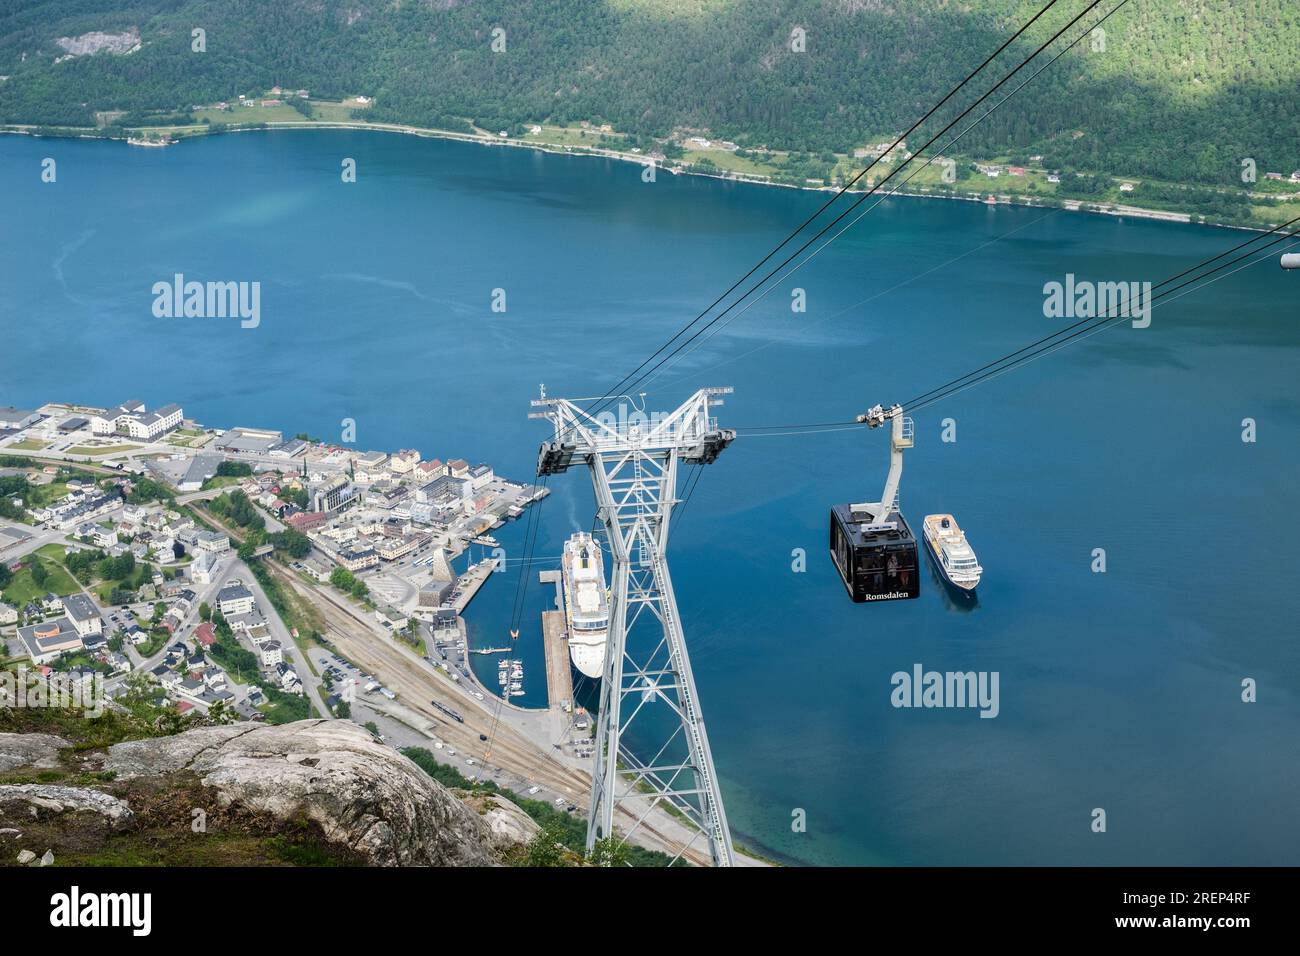 Romsdalgondolen gondola cable car descending from Nesaksla mountain with 2 cruise ships in port by the town below. Andalsnes, Møre og Romsdal, Norway Stock Photo